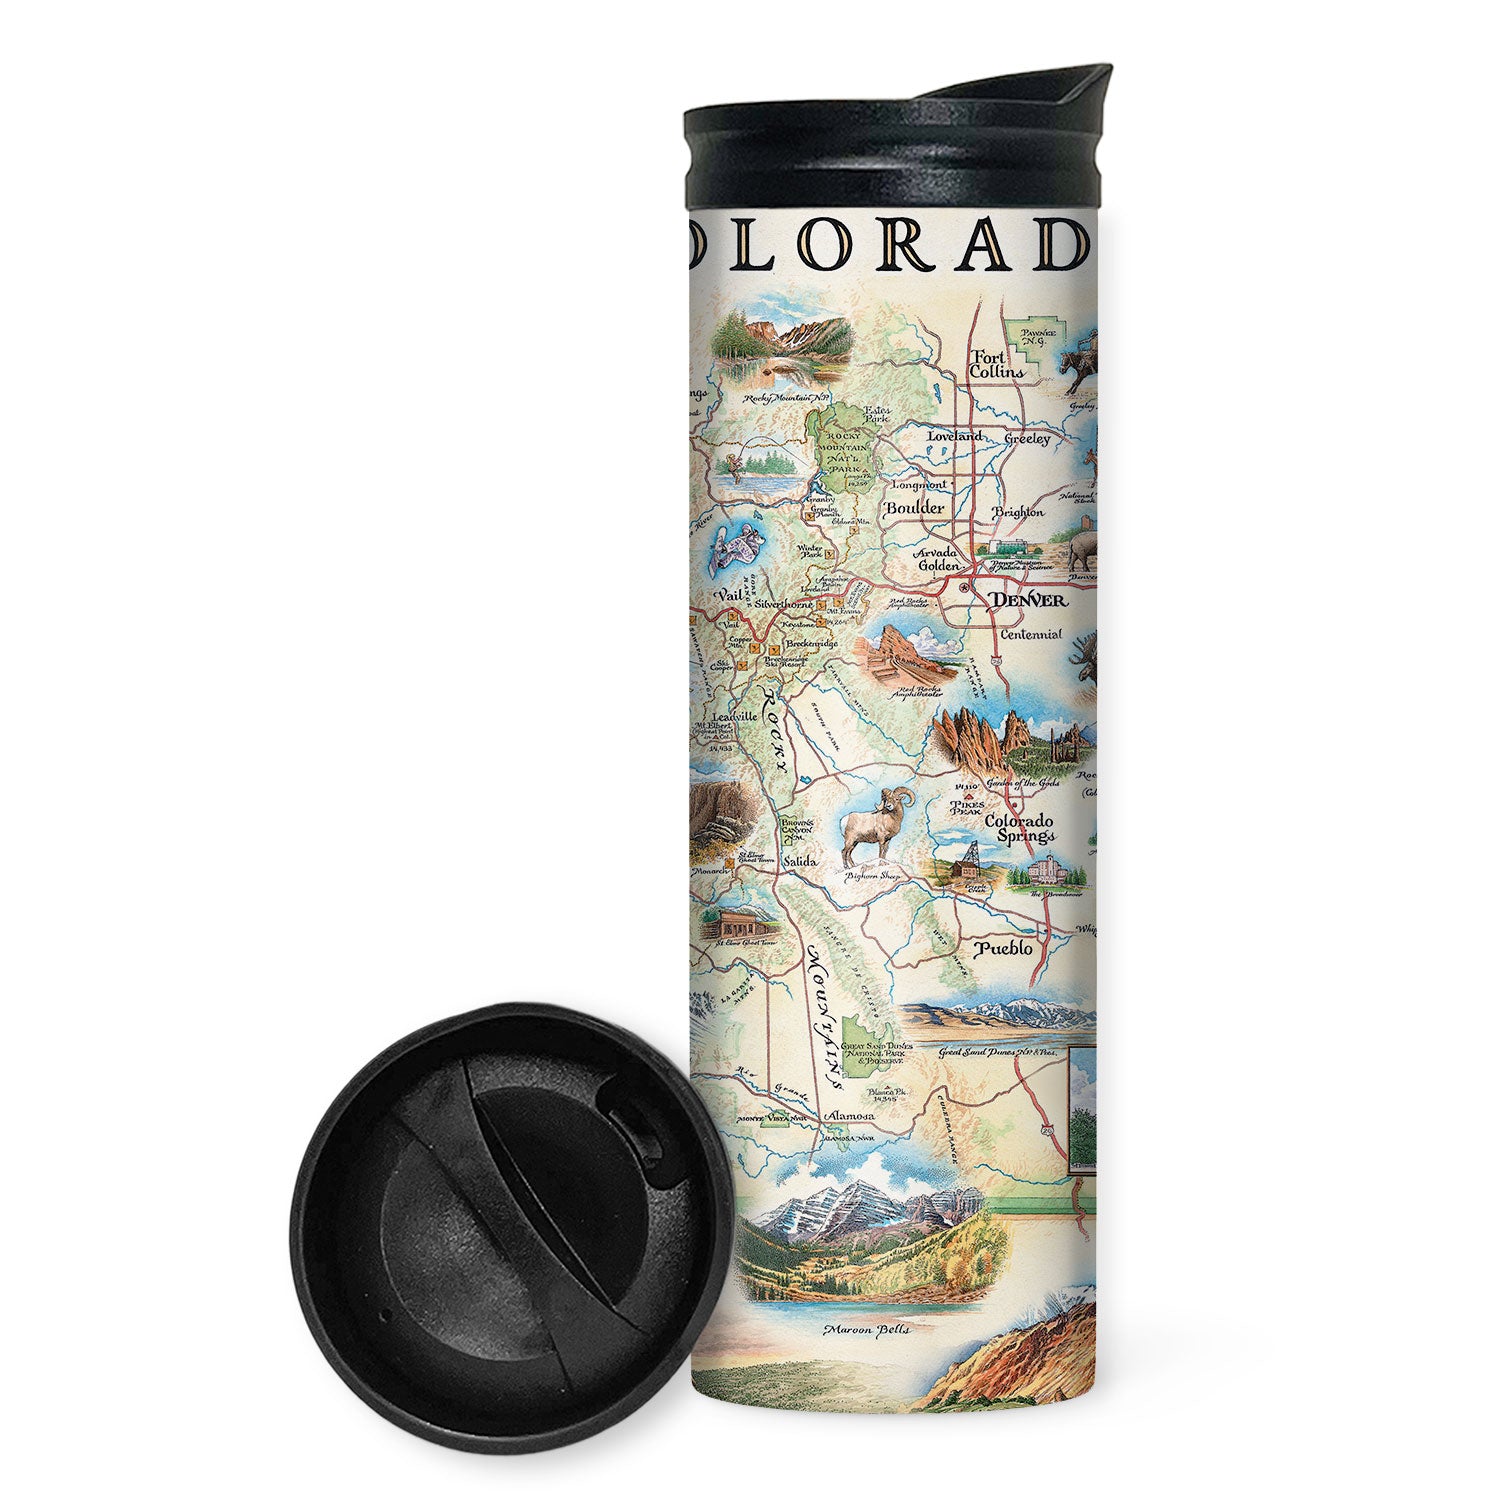 Colorado Map travel drinkware by Xplorer Maps that showcases various cities including Denver, Fort Collins, Colorado Springs, Aspen, and Durango. It also features local flora and fauna, such as moose, Rocky Mountain elk, turtles, eagles, and Bighorn Sheep, as well as the indigenous Navajo and Hopi peoples. The map highlights popular activities like hiking, biking, rafting, and skiing. 